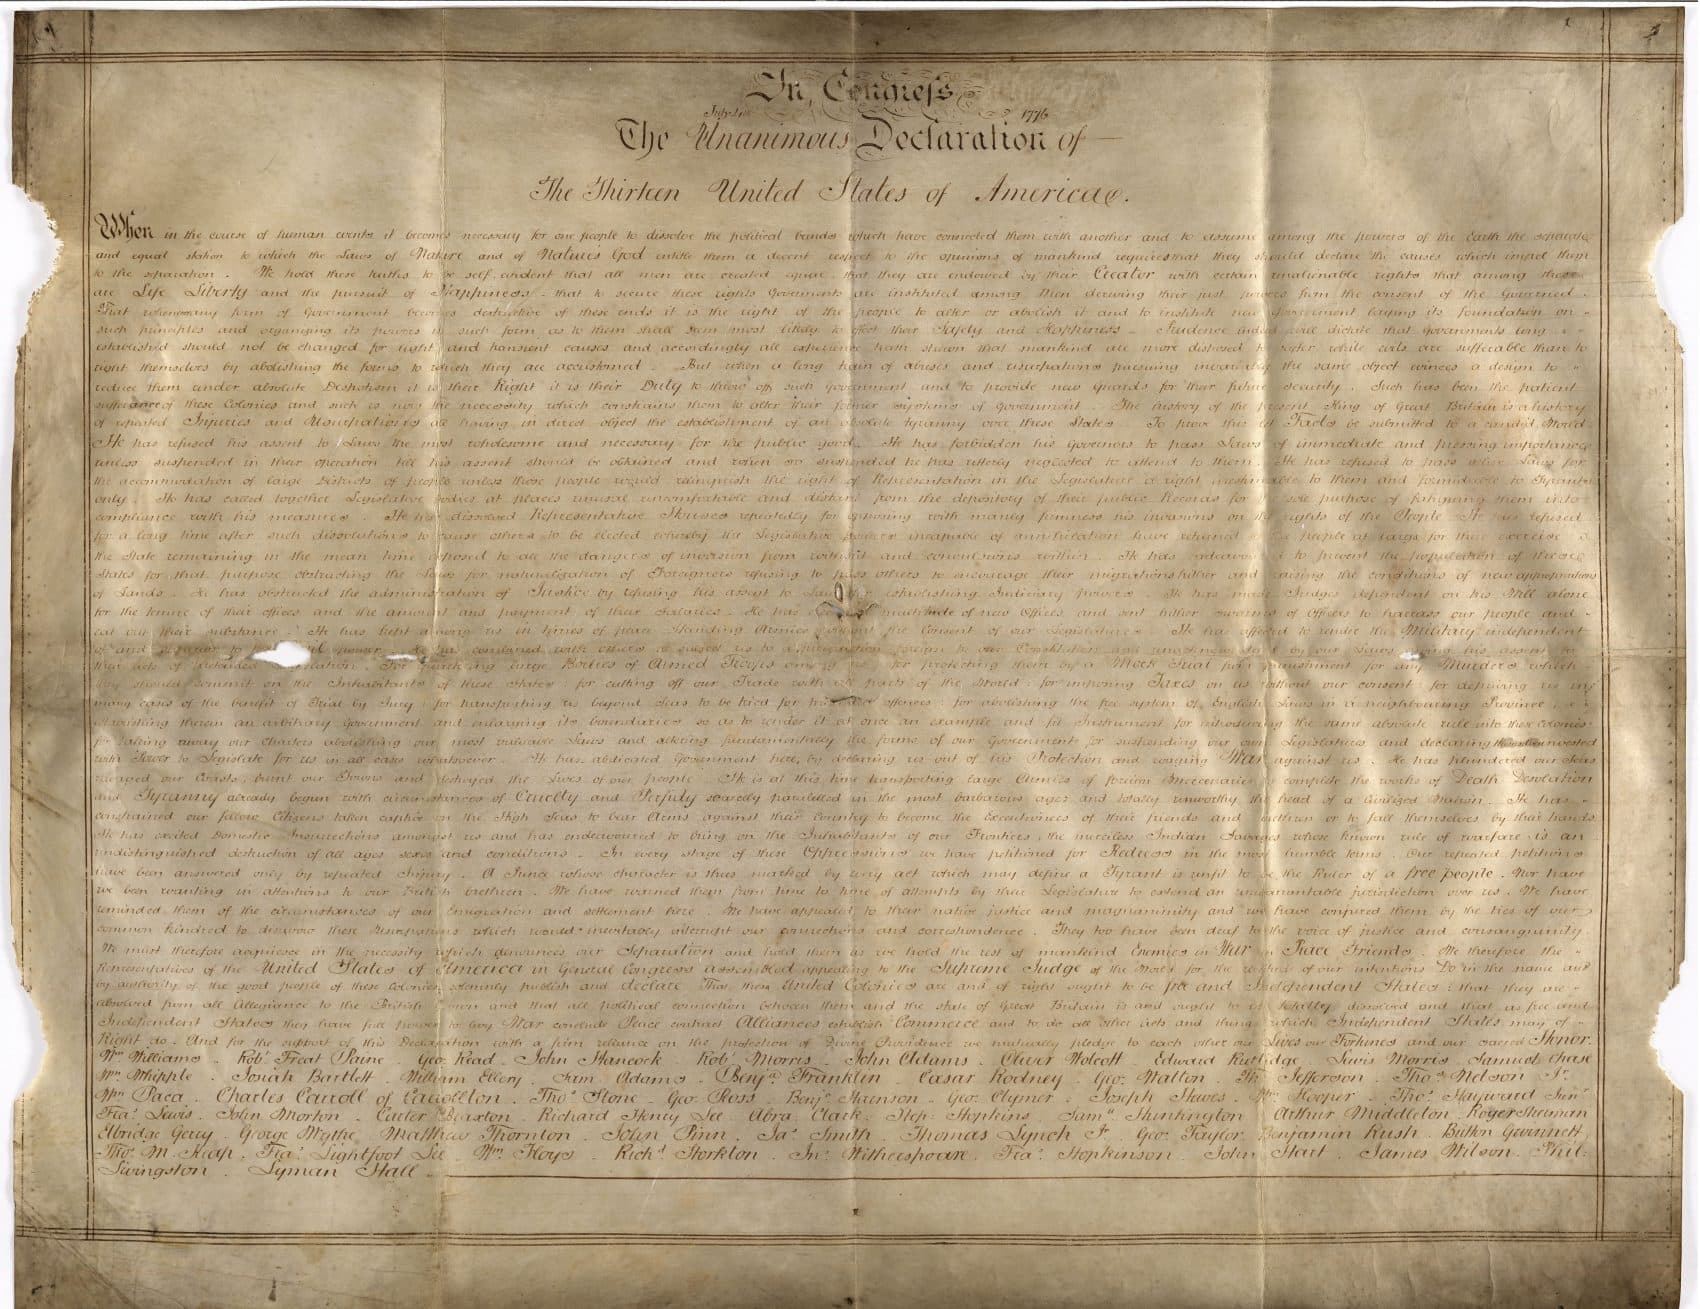 The Sussex Declaration. West Sussex Record Office Add Mss 8981. (Courtesy)